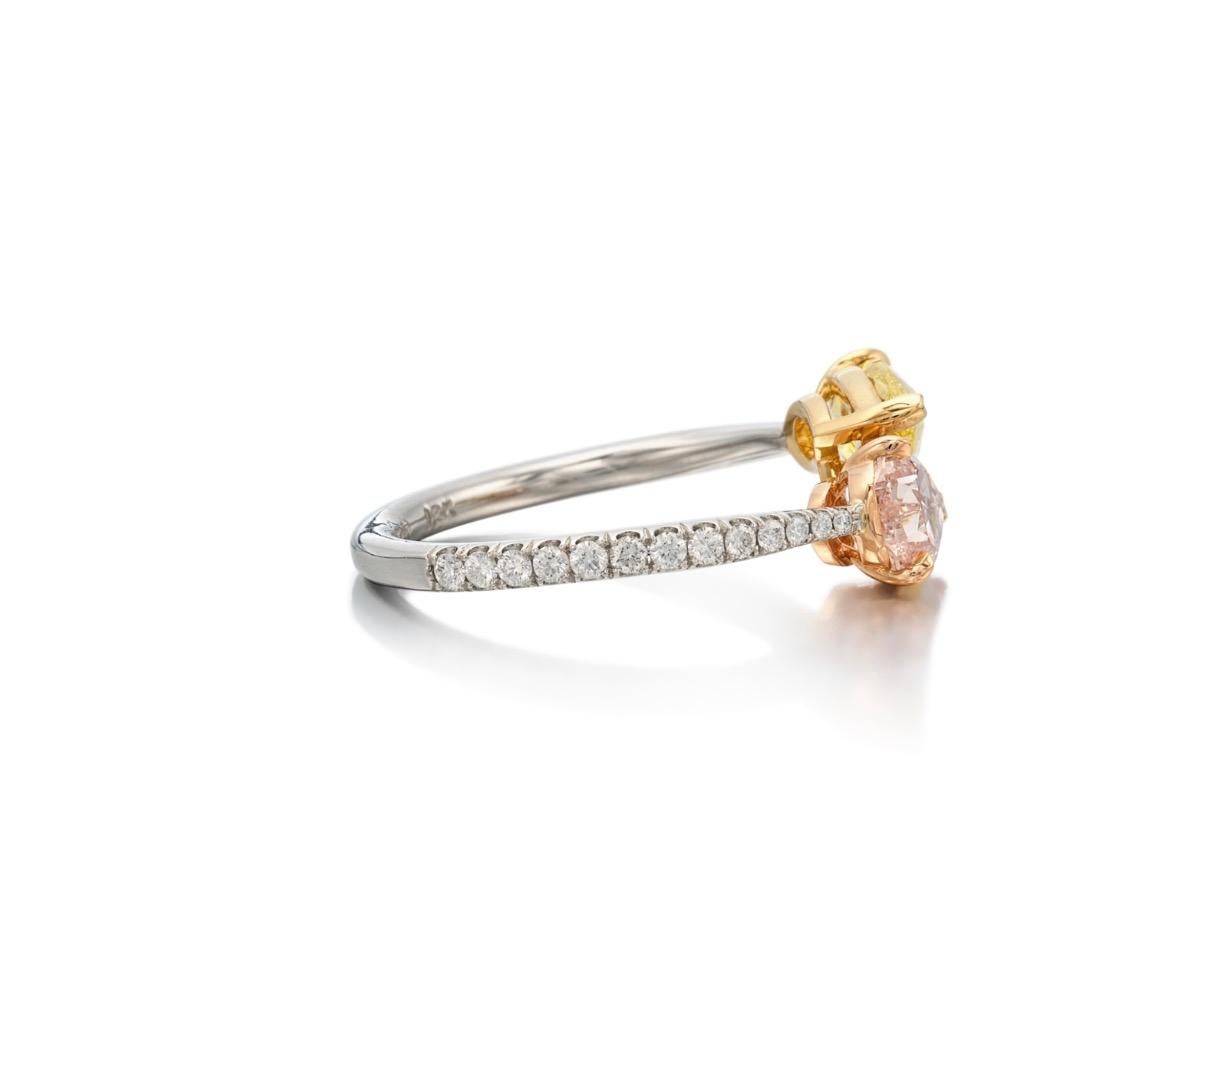 The Toi et Moi ring, with its distinctive design featuring a 1.08ct Fancy Brownish Pink SI1 Pear-shaped Diamond and a 1ct Fancy Vivid Yellow SI2 Pear-shaped Diamond, holds profound symbolism that transcends mere adornment. Rooted in the French